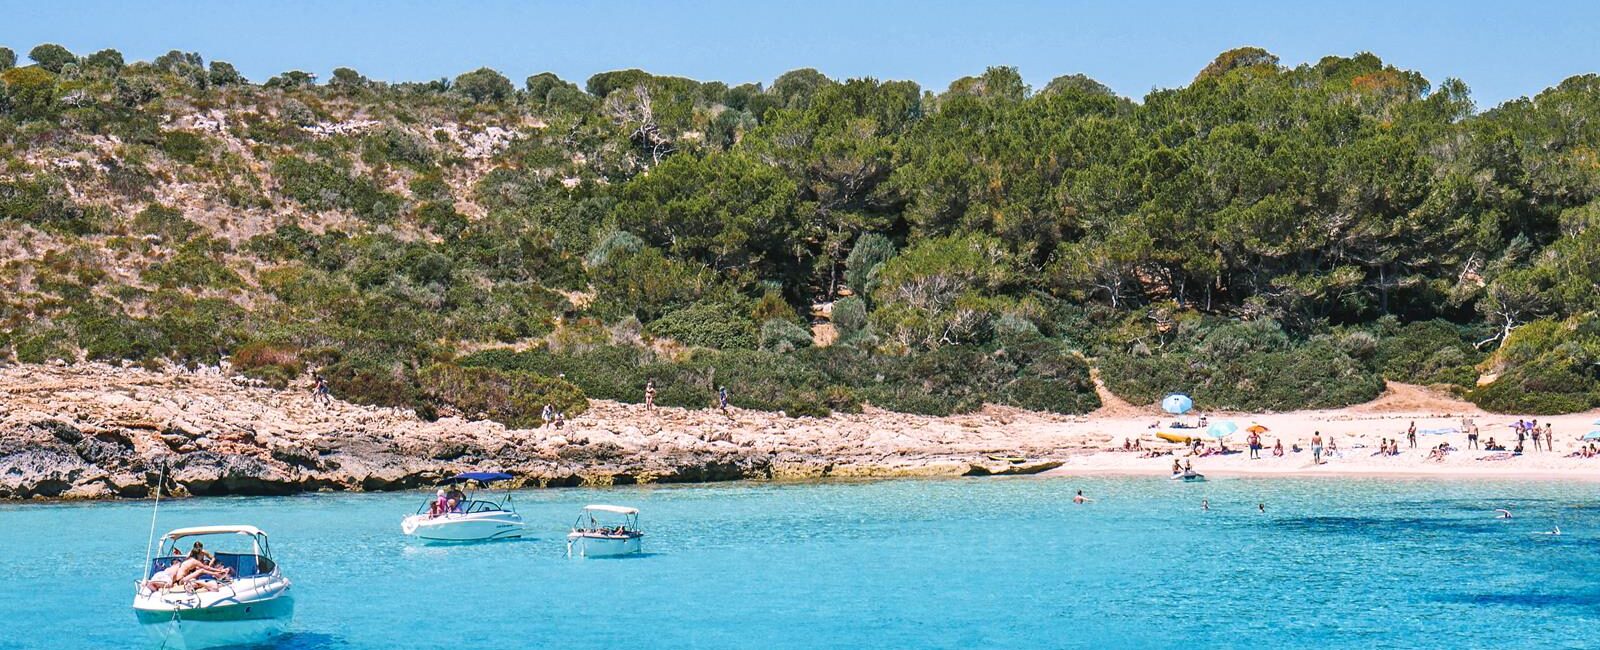 WHAT DO MALLORCANS THINK ABOUT TOURISTS? – INTERVIEW WITH A NATIVE OF MAJORCA